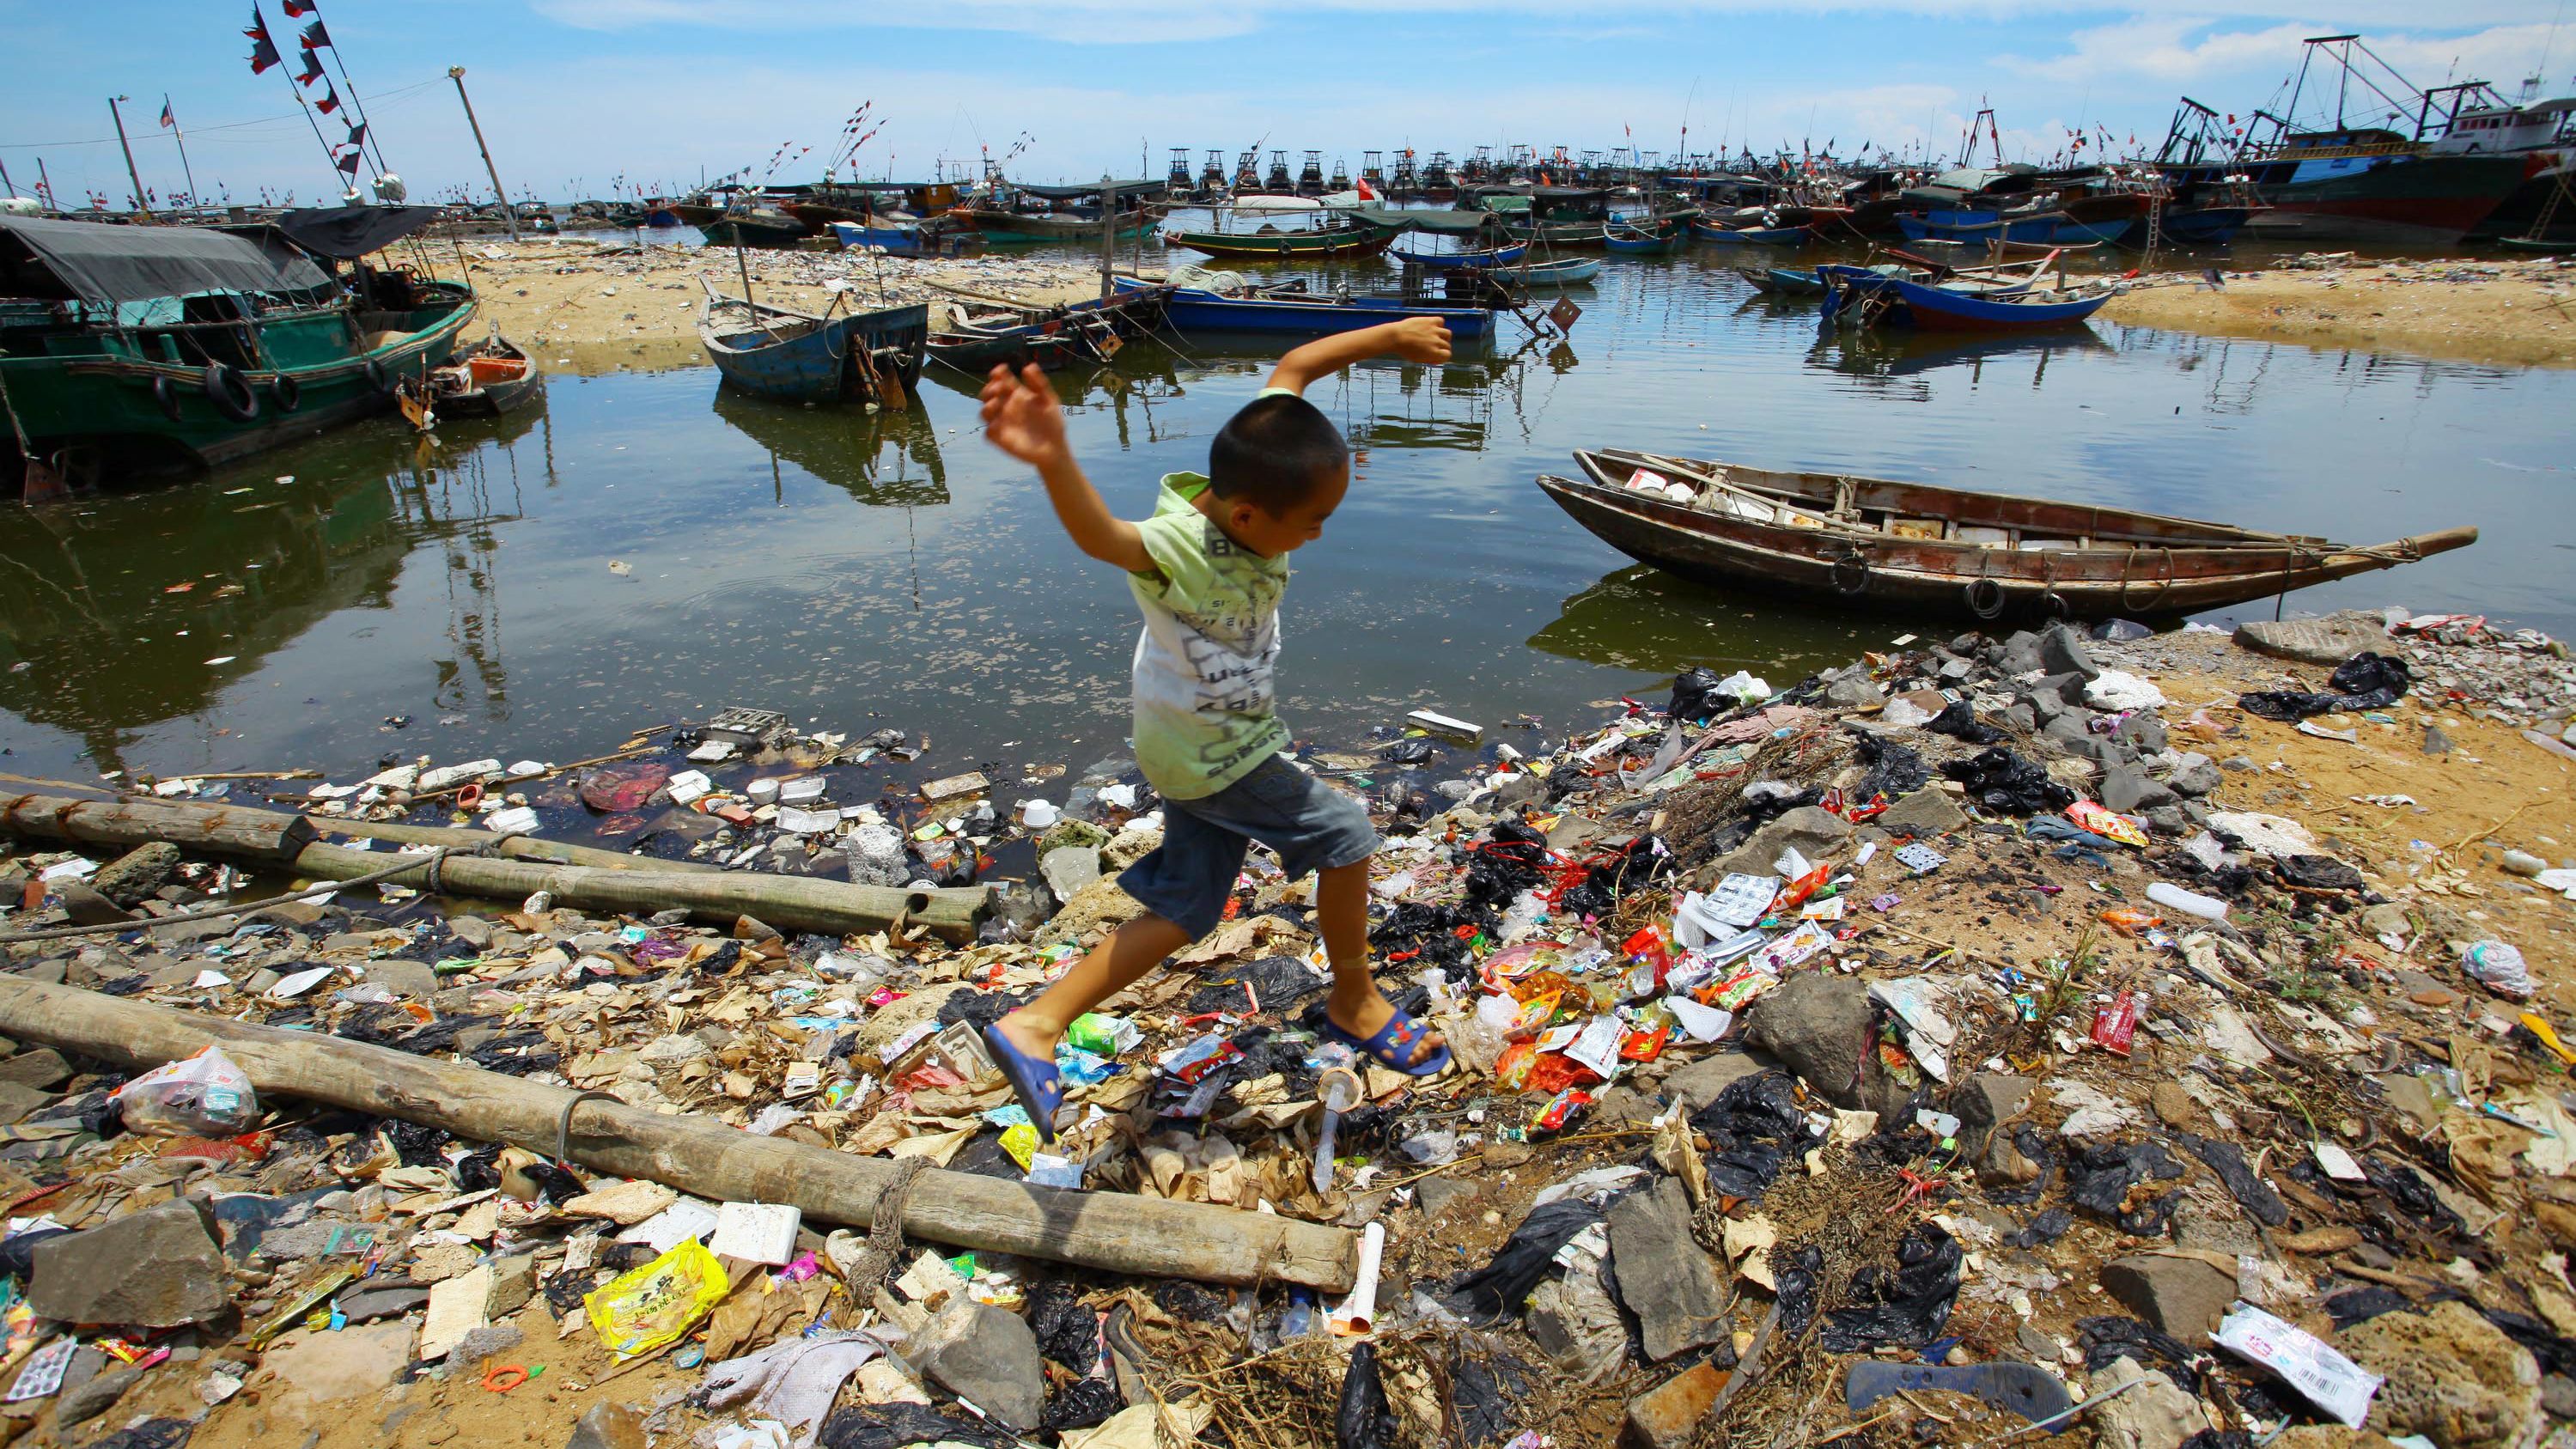 China, the most populous nation, has the most mismanaged plastic waste per year, according to a report in the journal Science.